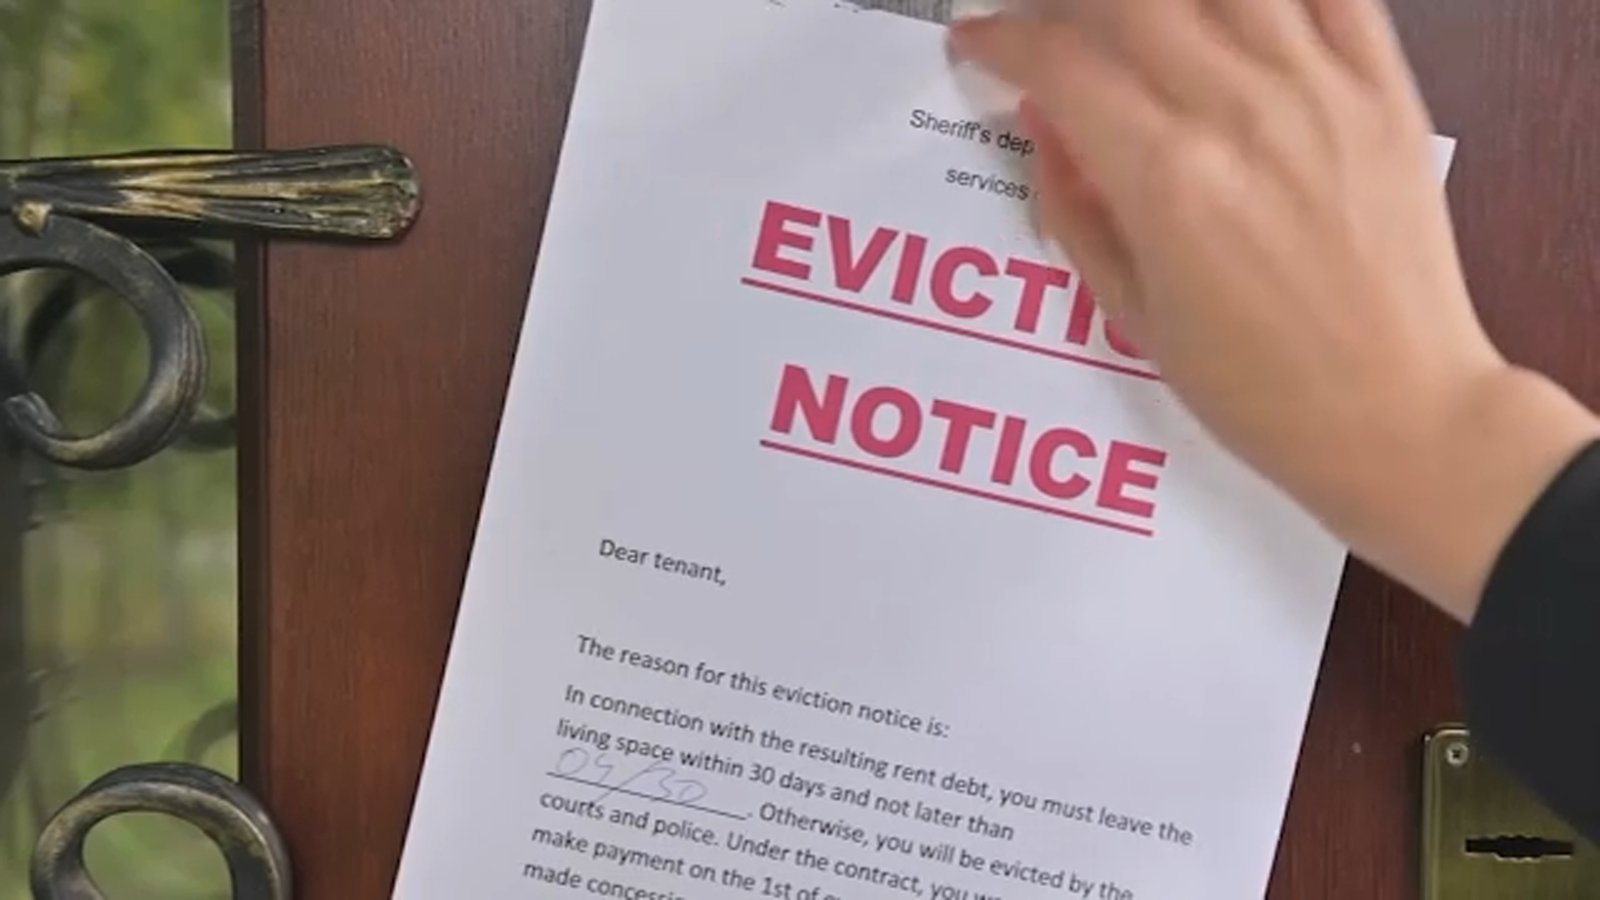 As times get tough, more people using crowdsourcing fundraisers for emergency evictions [Video]